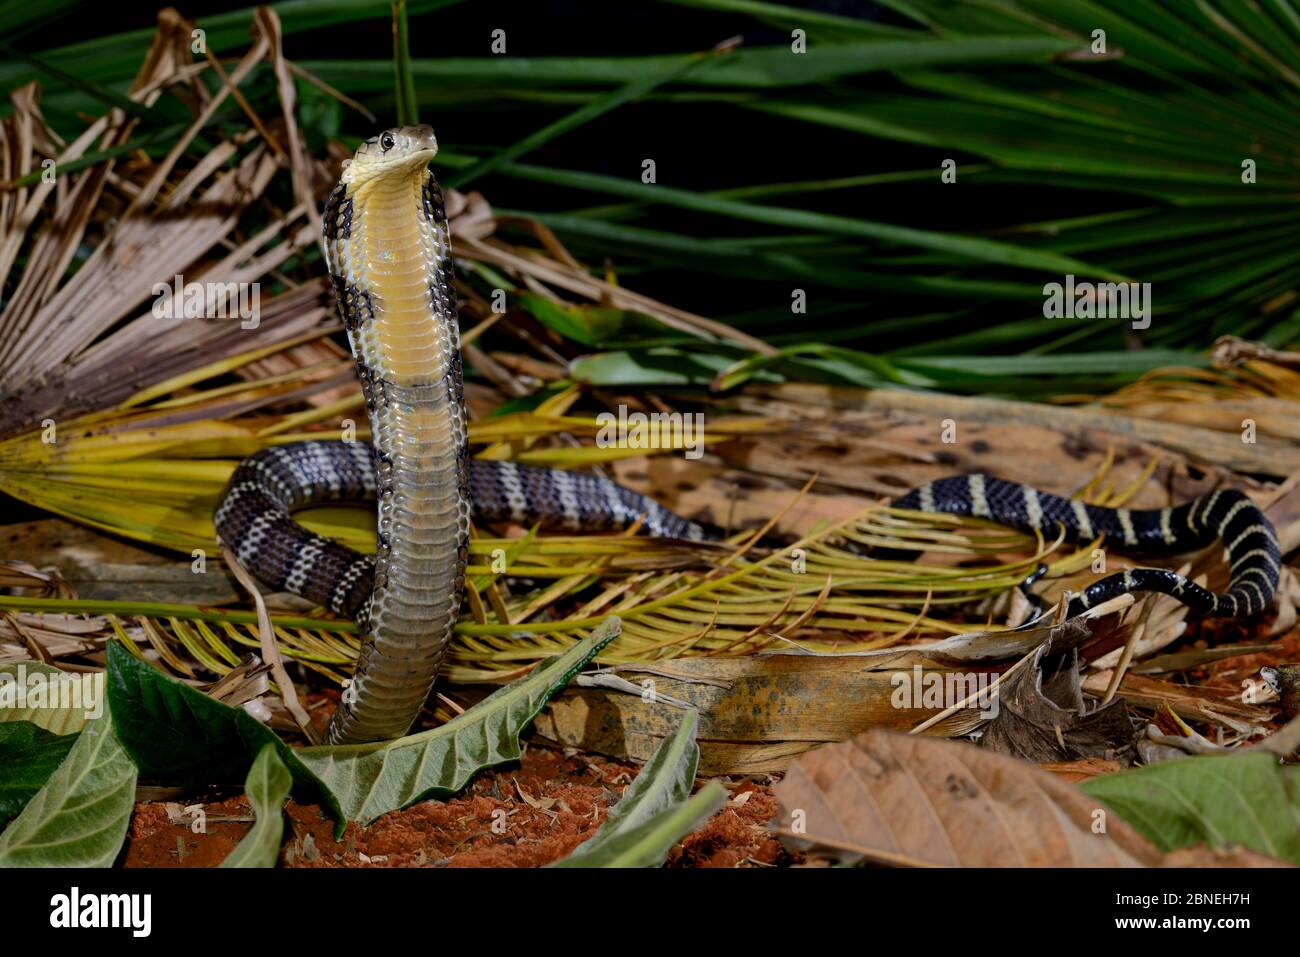 King cobra (Ophiophagus hannah) juvenile in threat pose,  captive occurs in South Asia. Venomous species. Stock Photo